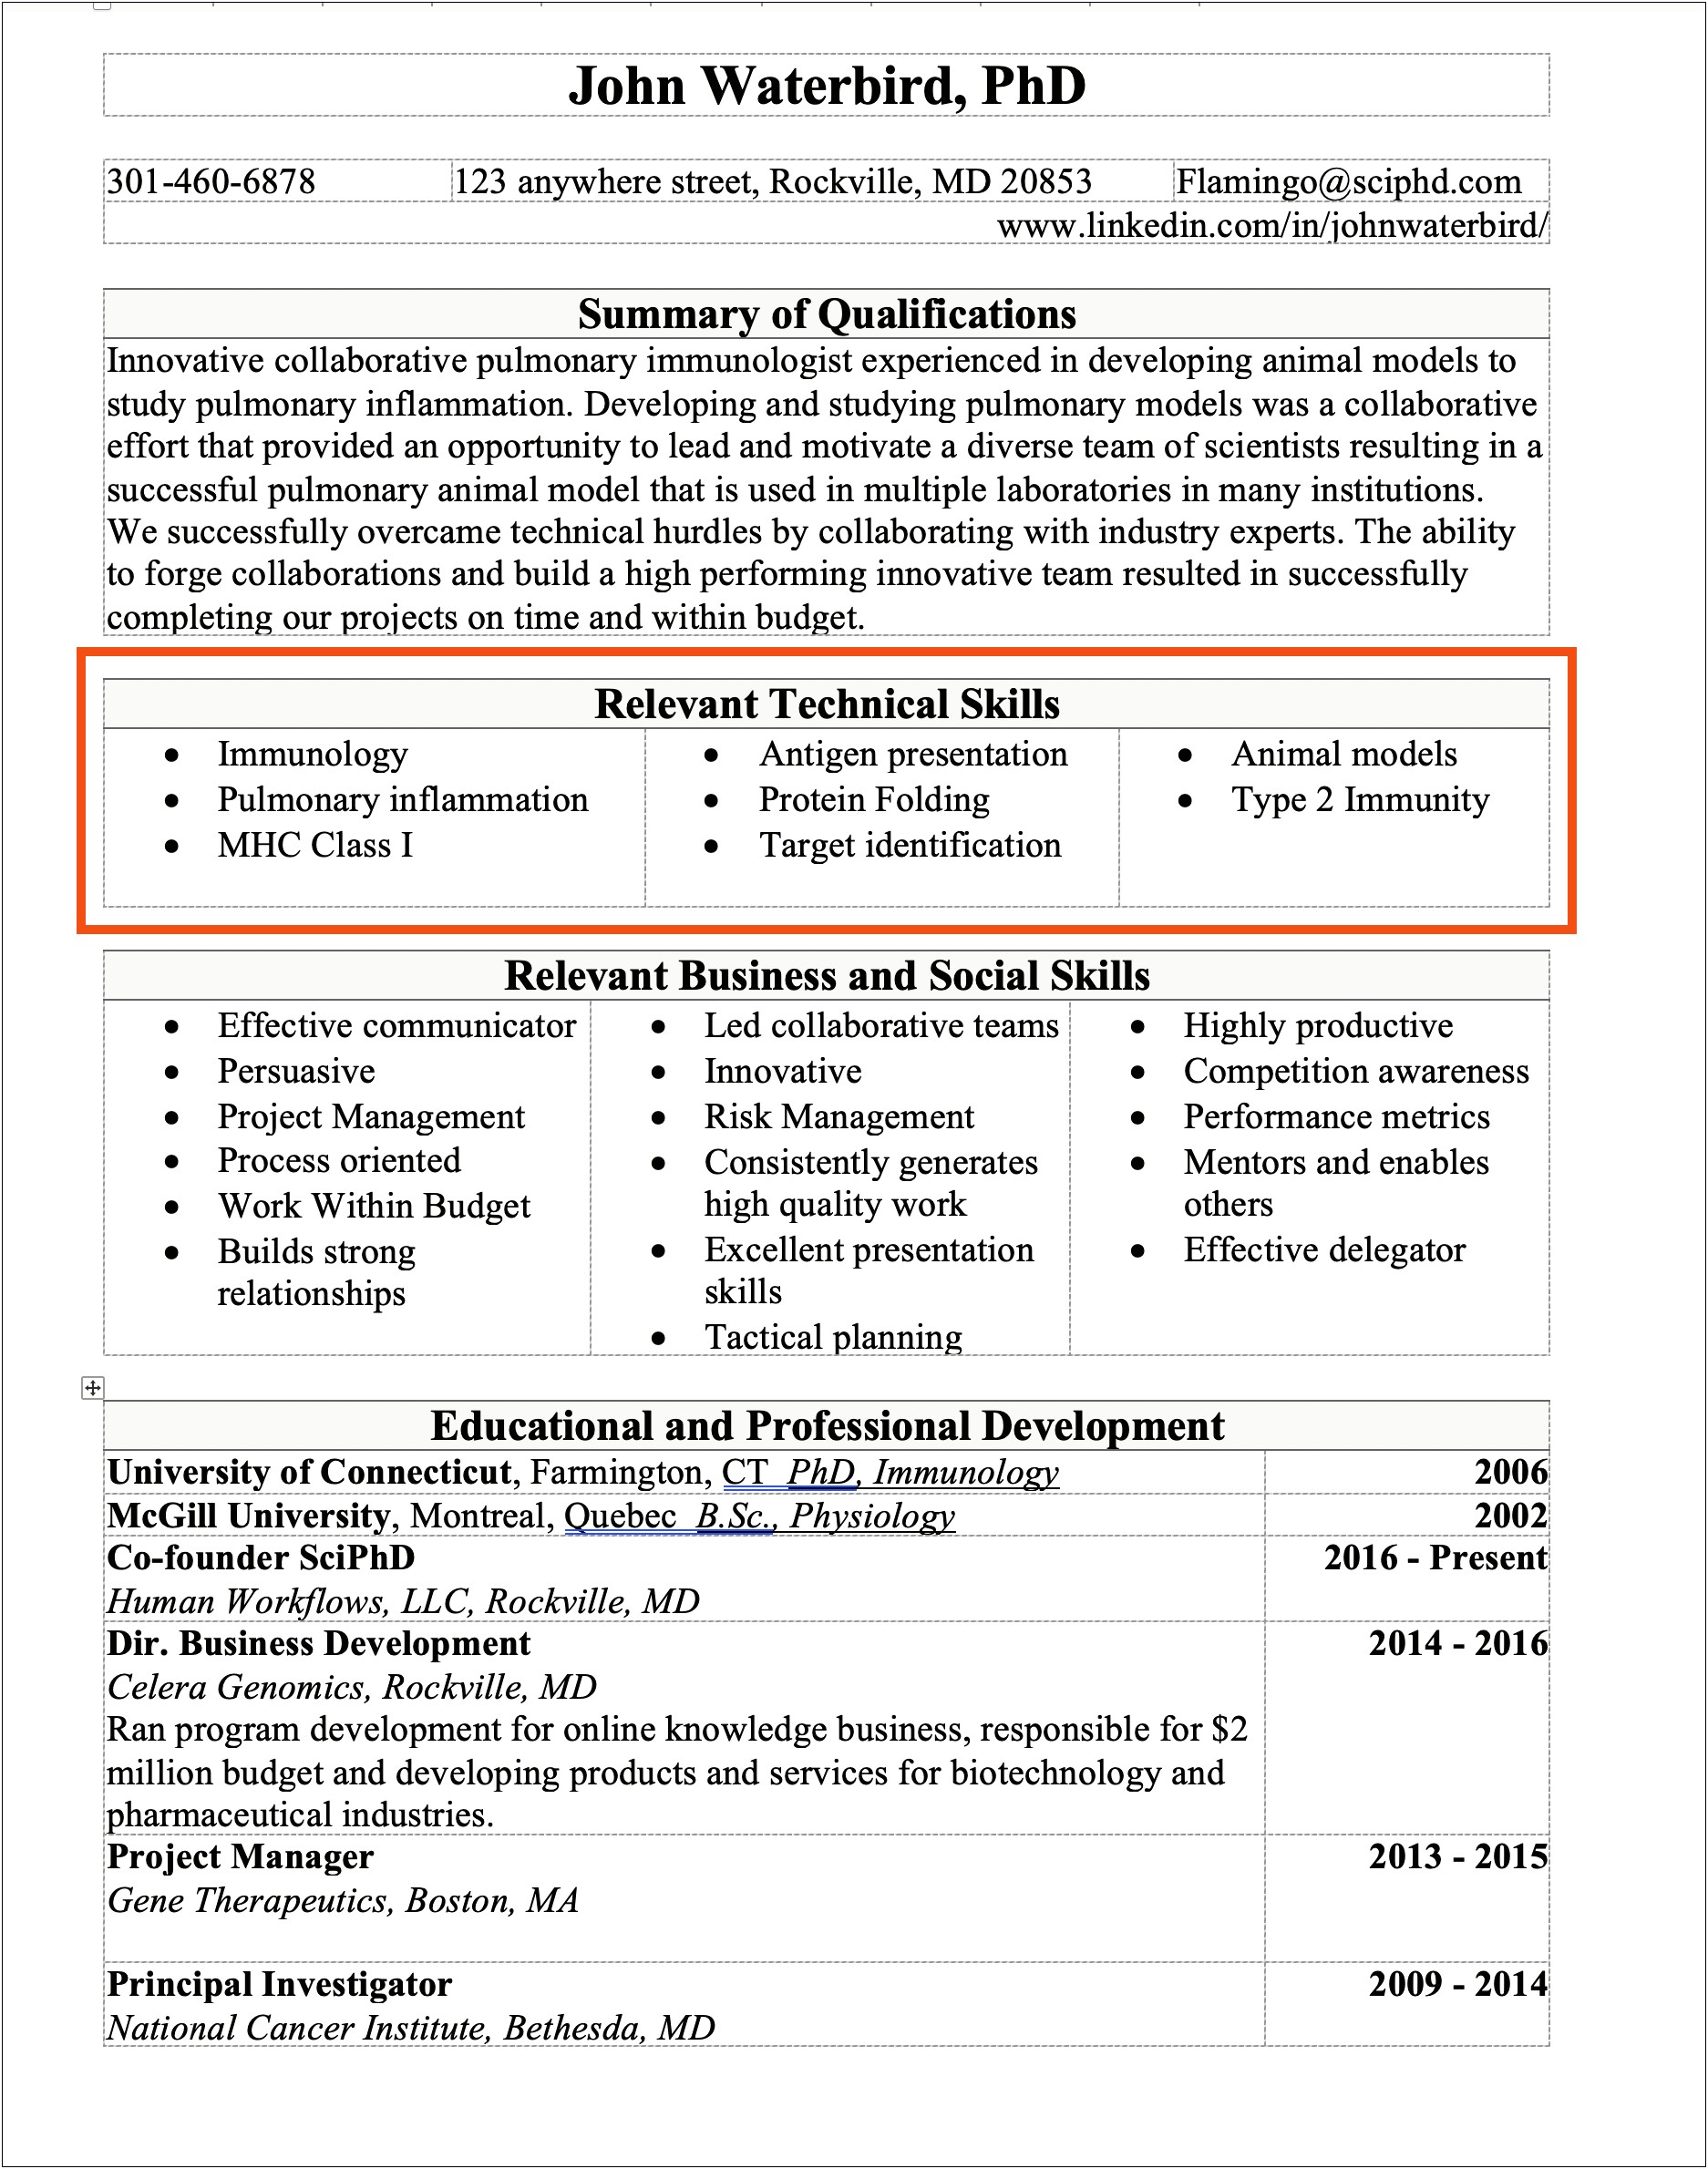 Resume Technical Skills And Achieveemnts